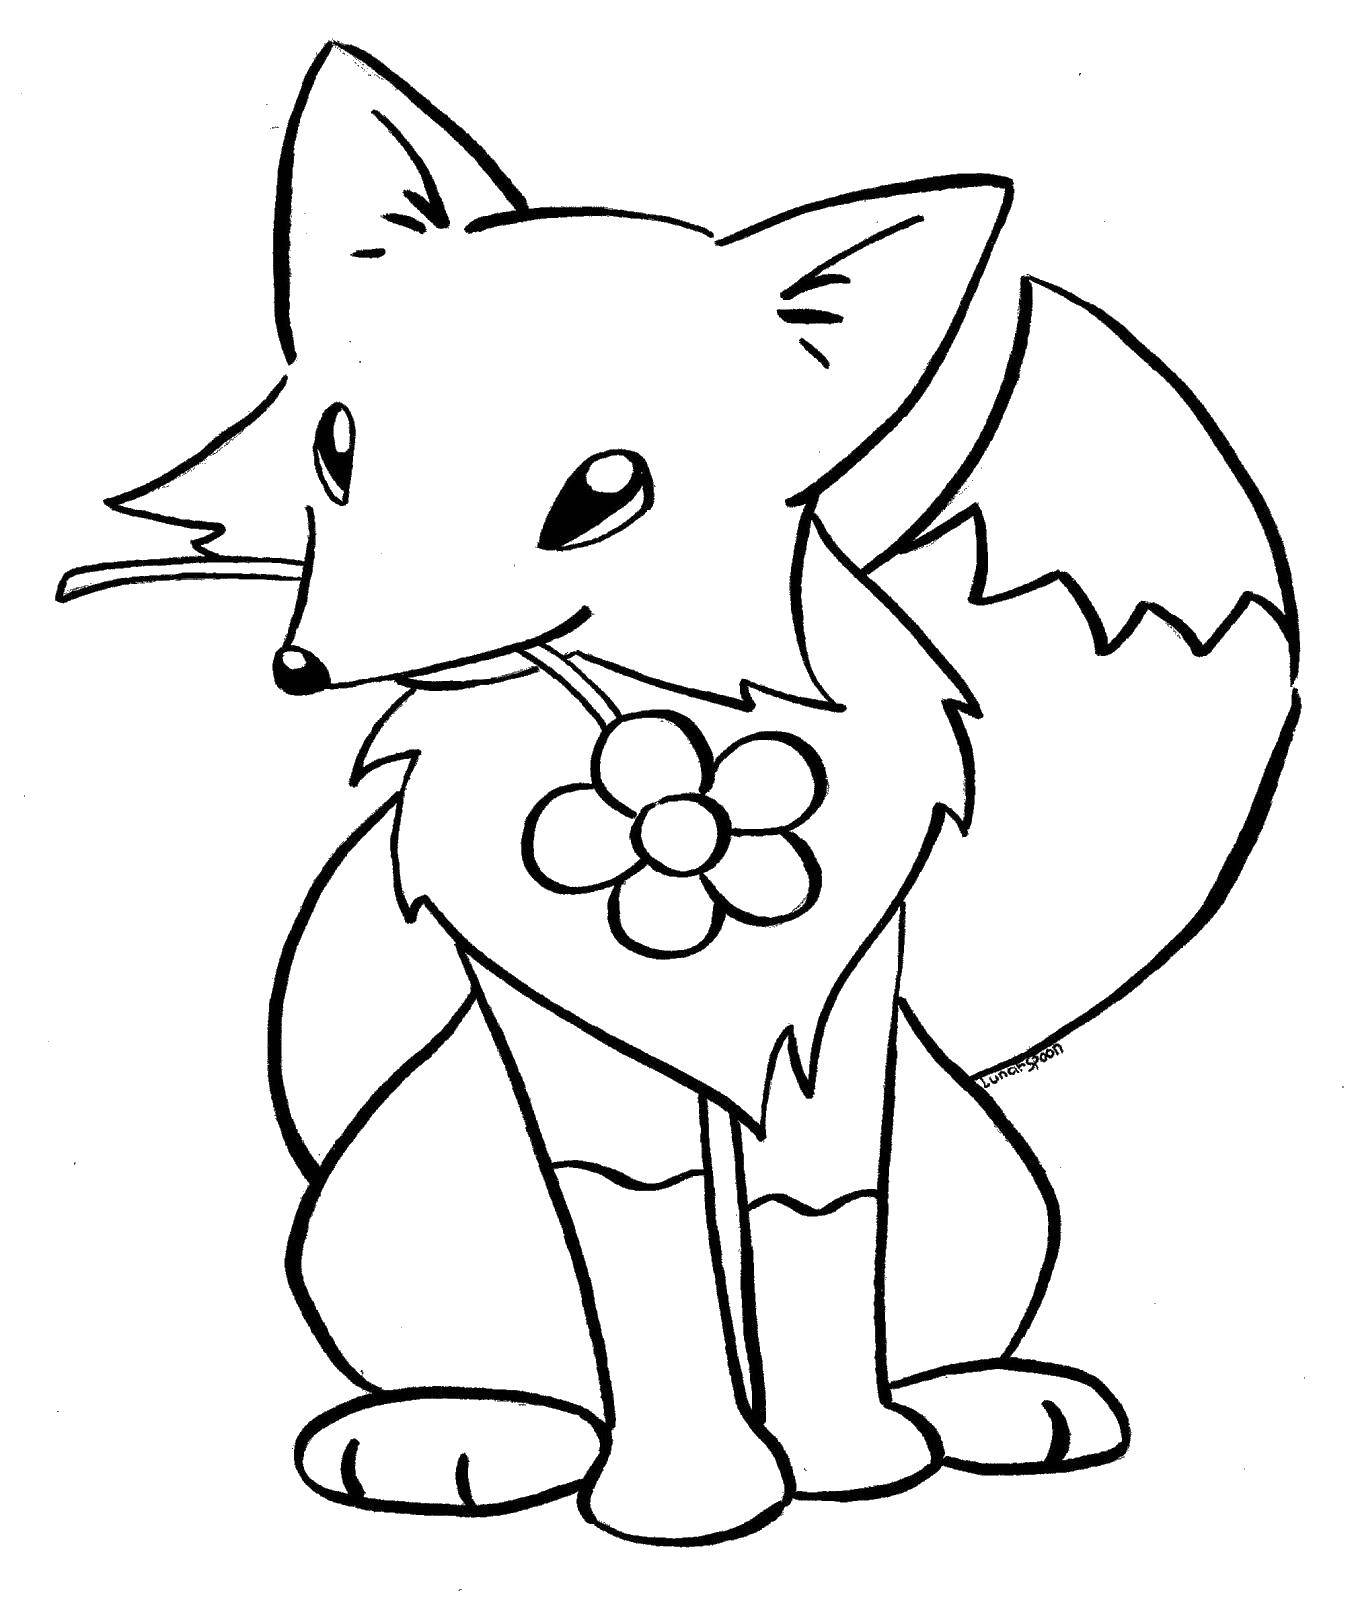 Coloring Fox with a flower. Category Animals. Tags:  animals, Fox, foxy, flower.